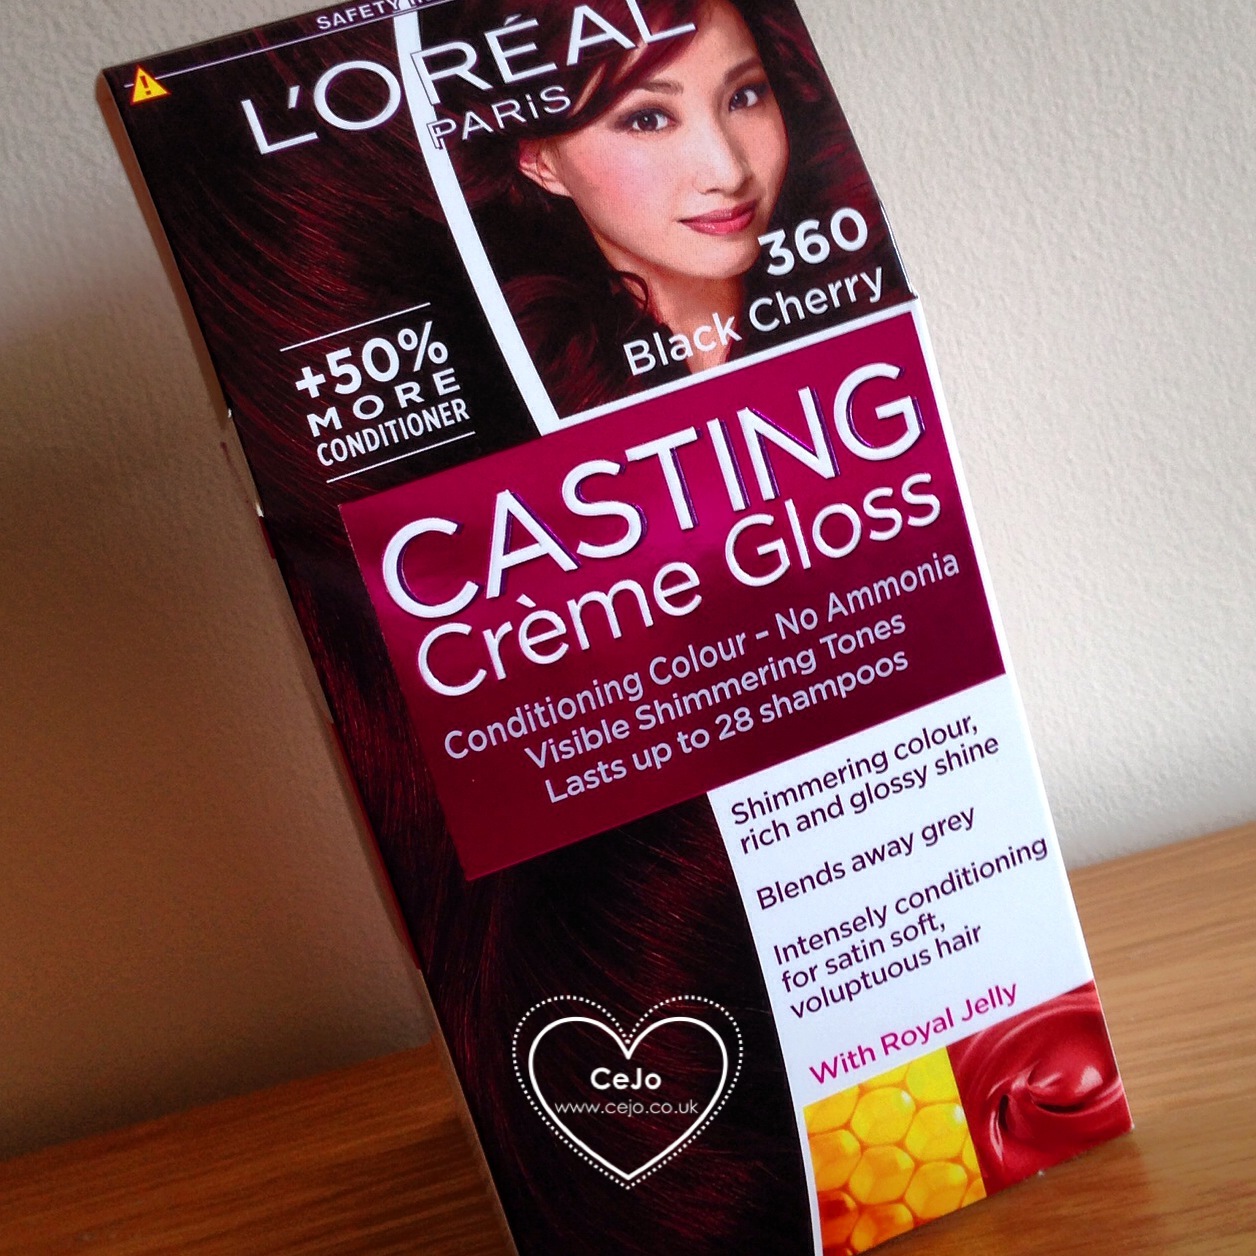 Things - Hair Colouring - L'oreal Casting Creme Gloss in ...